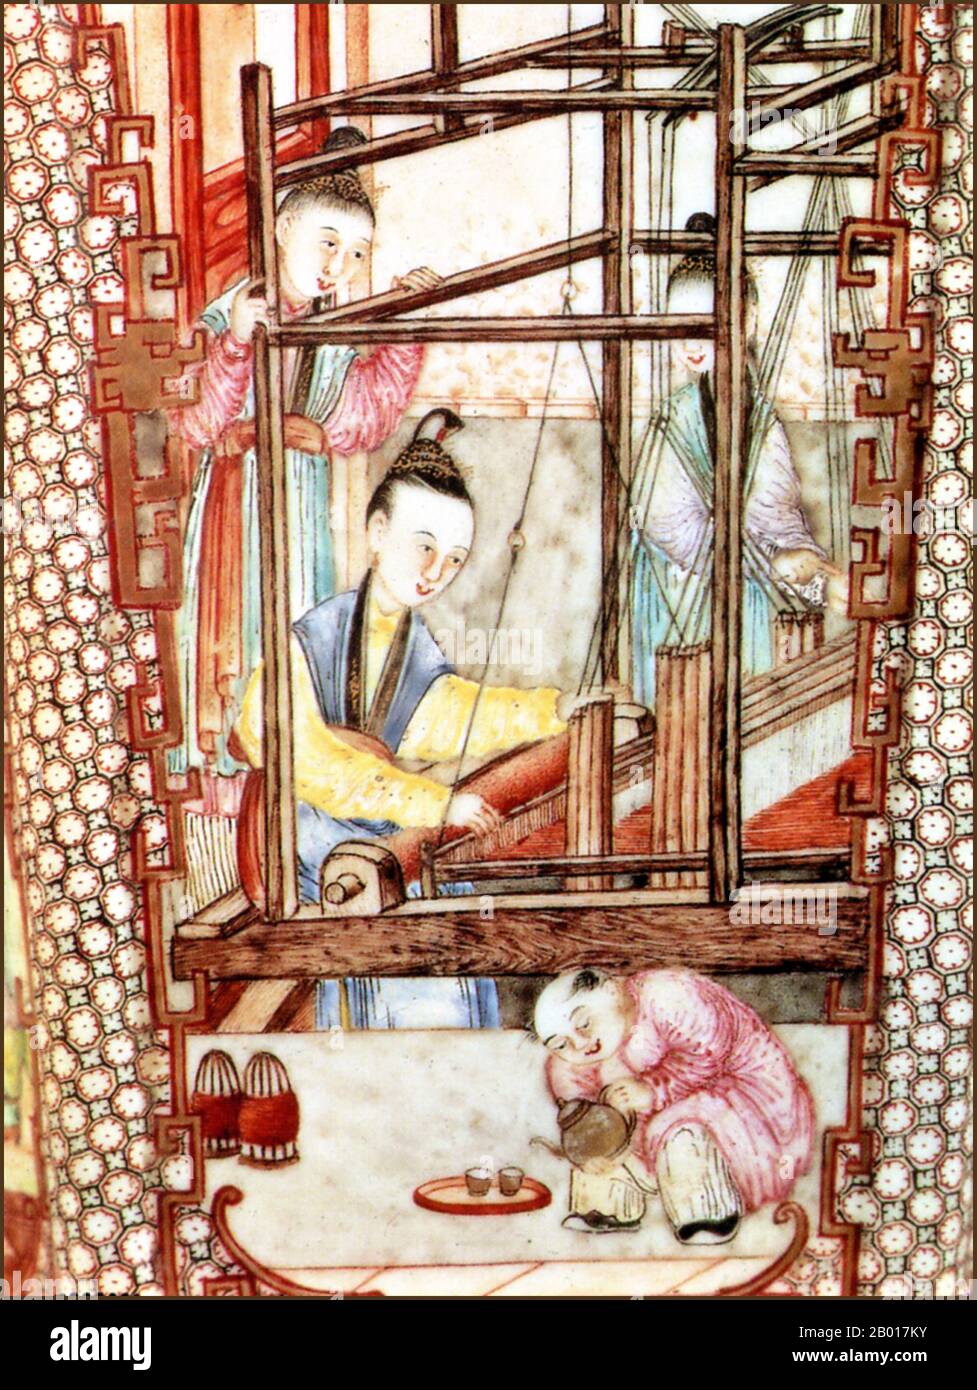 China: Ming Dynasty ceramic painting of silk-weavers at work, 15th century.  Three female silk-weavers at work while a servant pours cups of tea. Detail from a Ming ceramic vase. Stock Photo